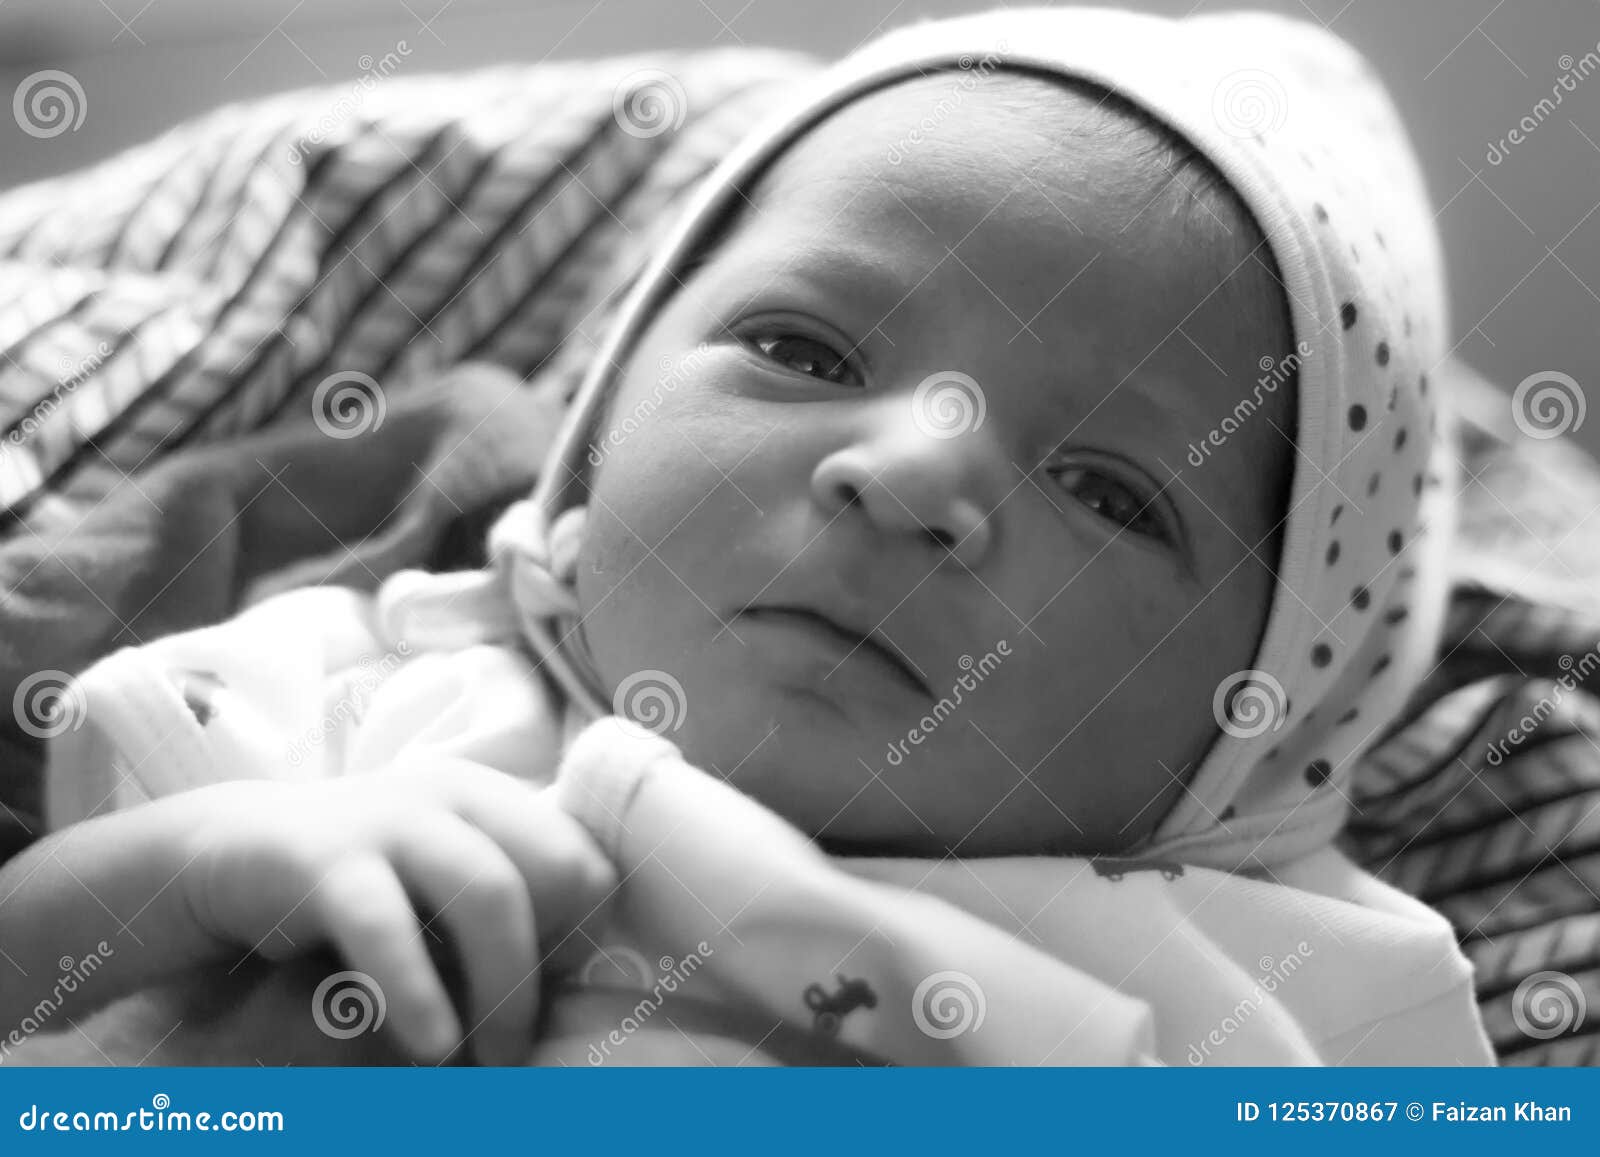 One Day Old New Born Baby Black and White Photo Stock Image ...